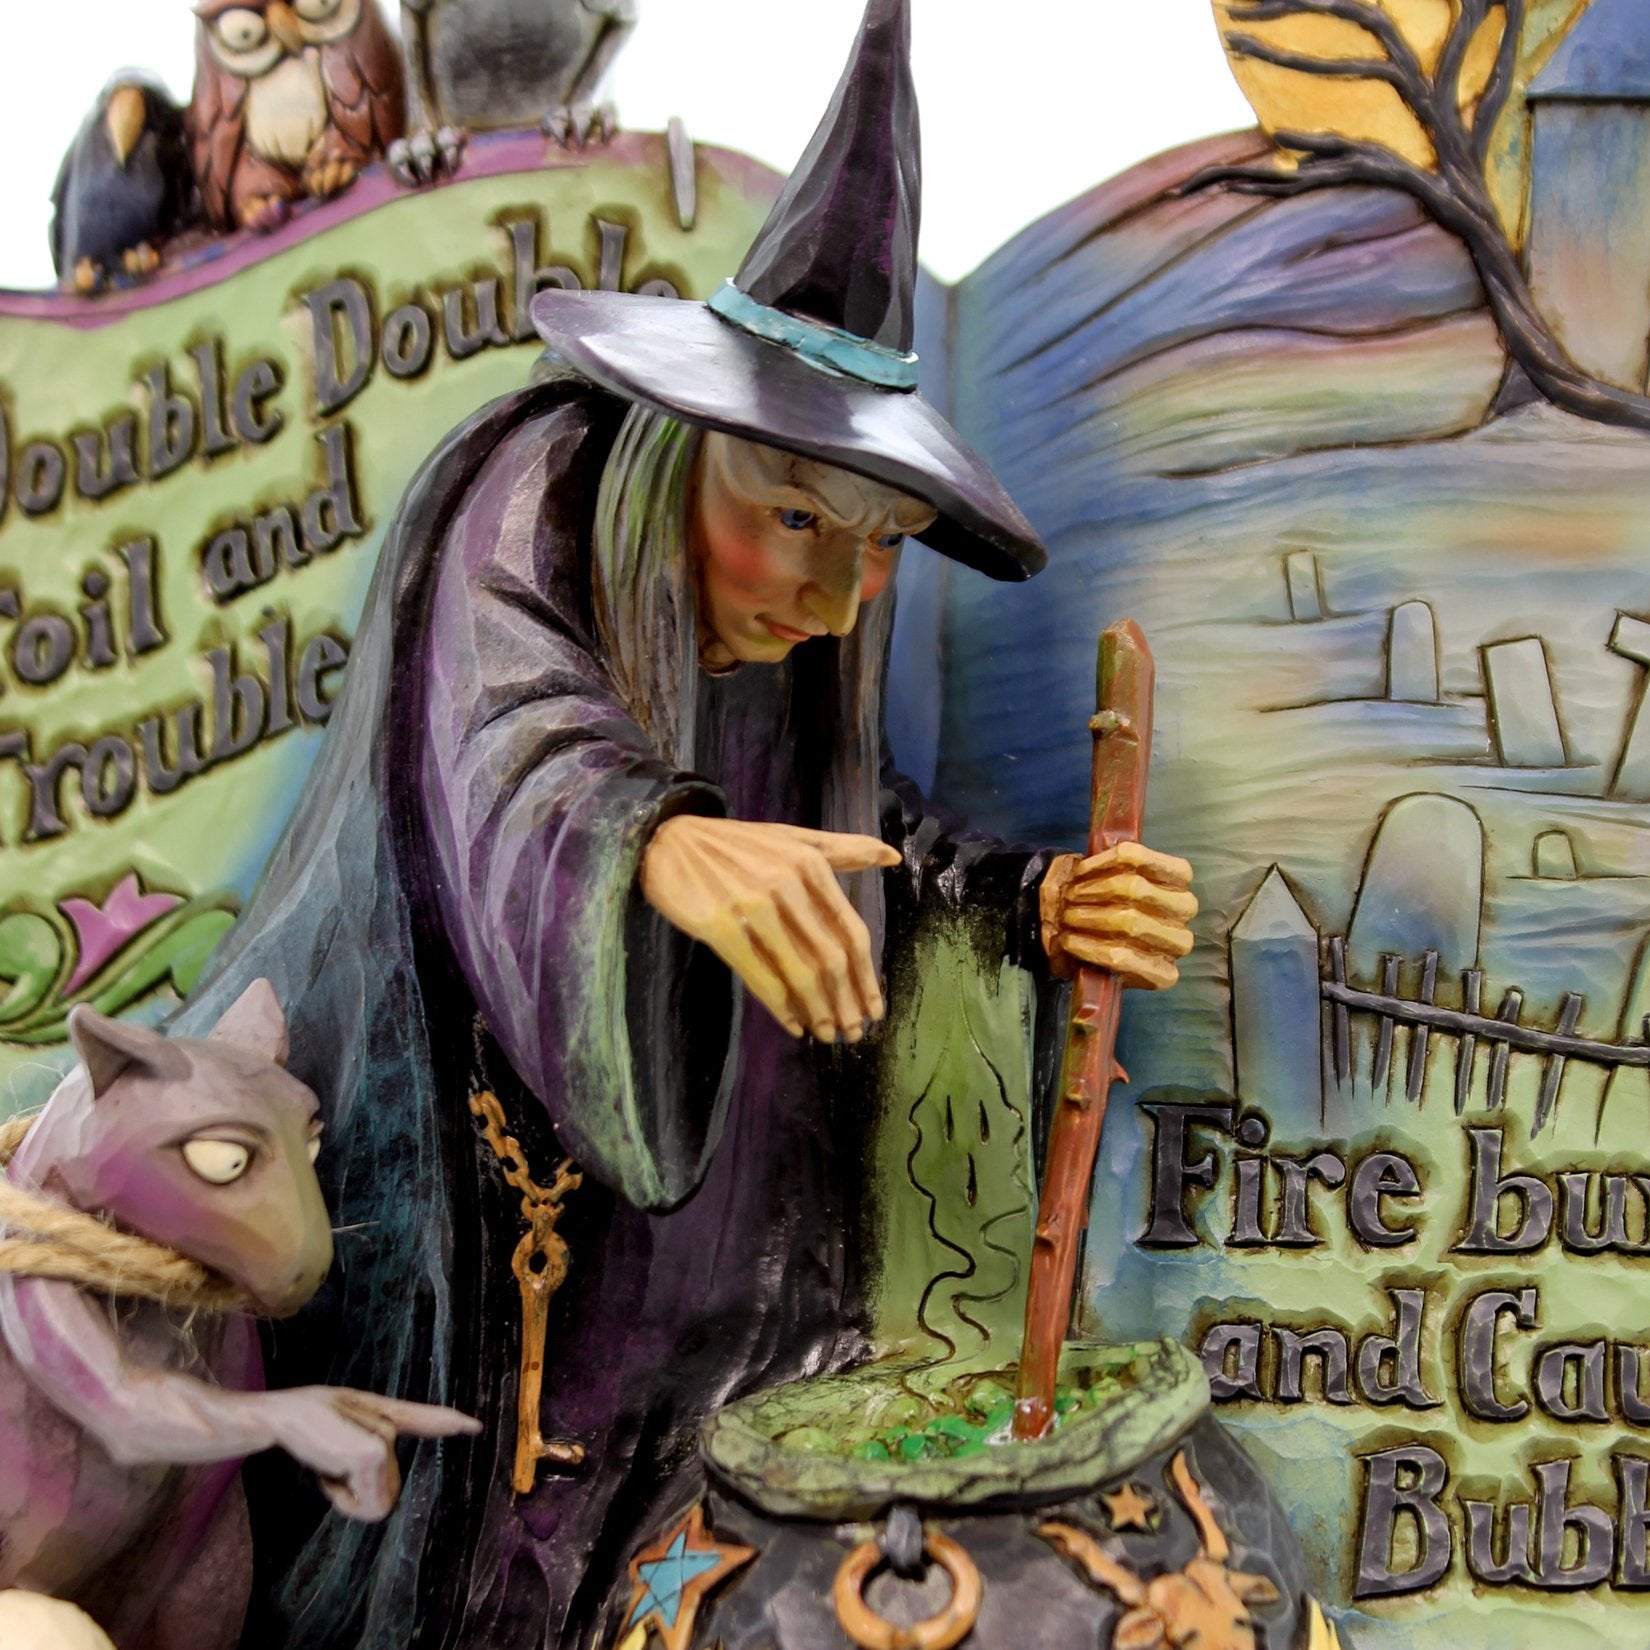 Jim Shore Heartwood Creek Curses Witch Spell Book Halloween Figurine 4047839 New